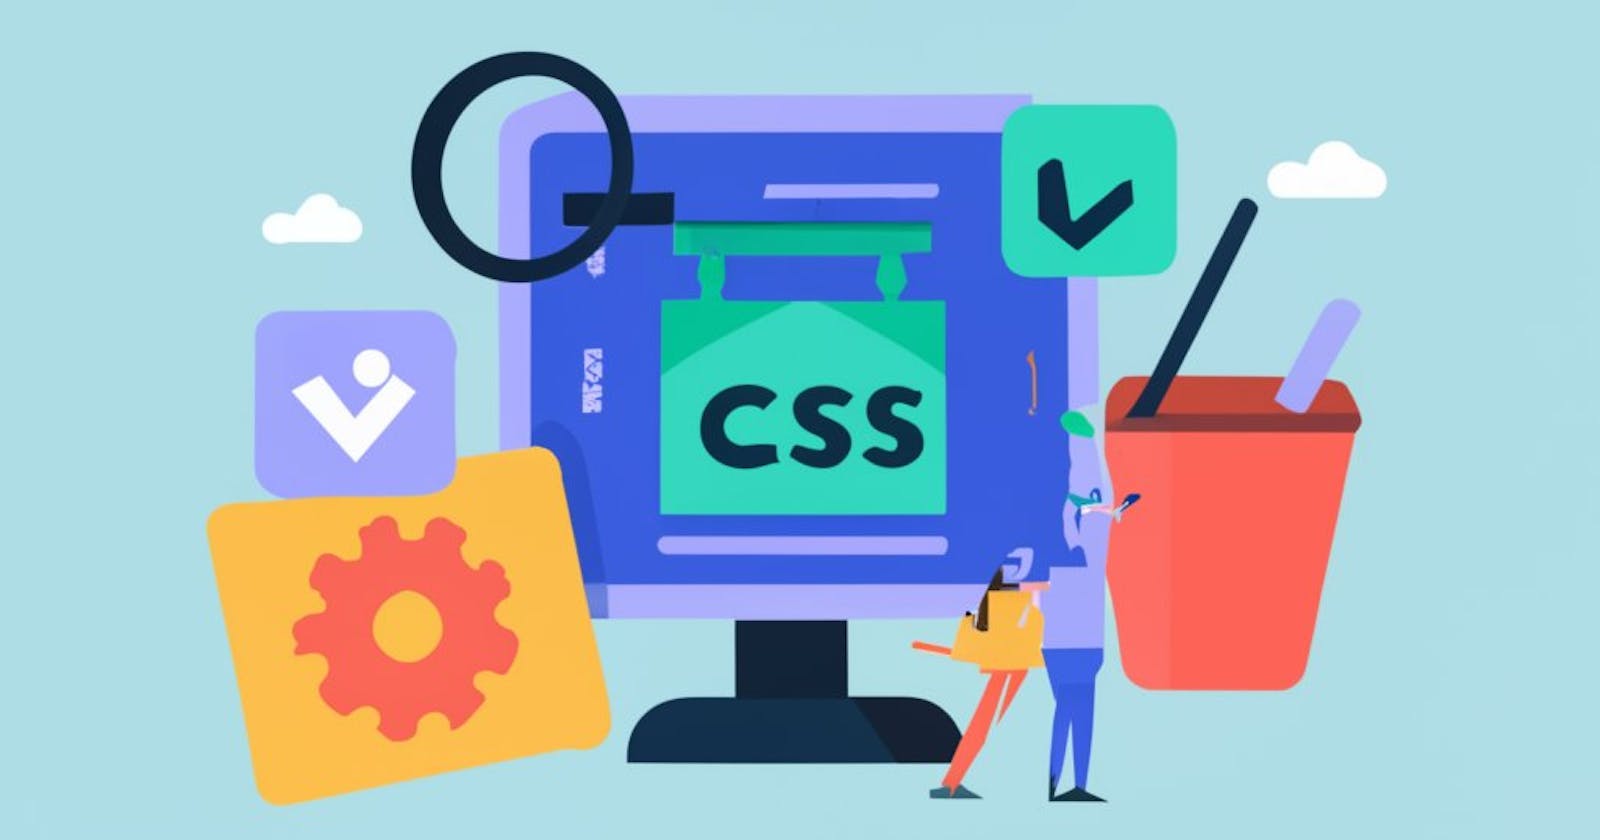 How do I apply CSS in react.js?